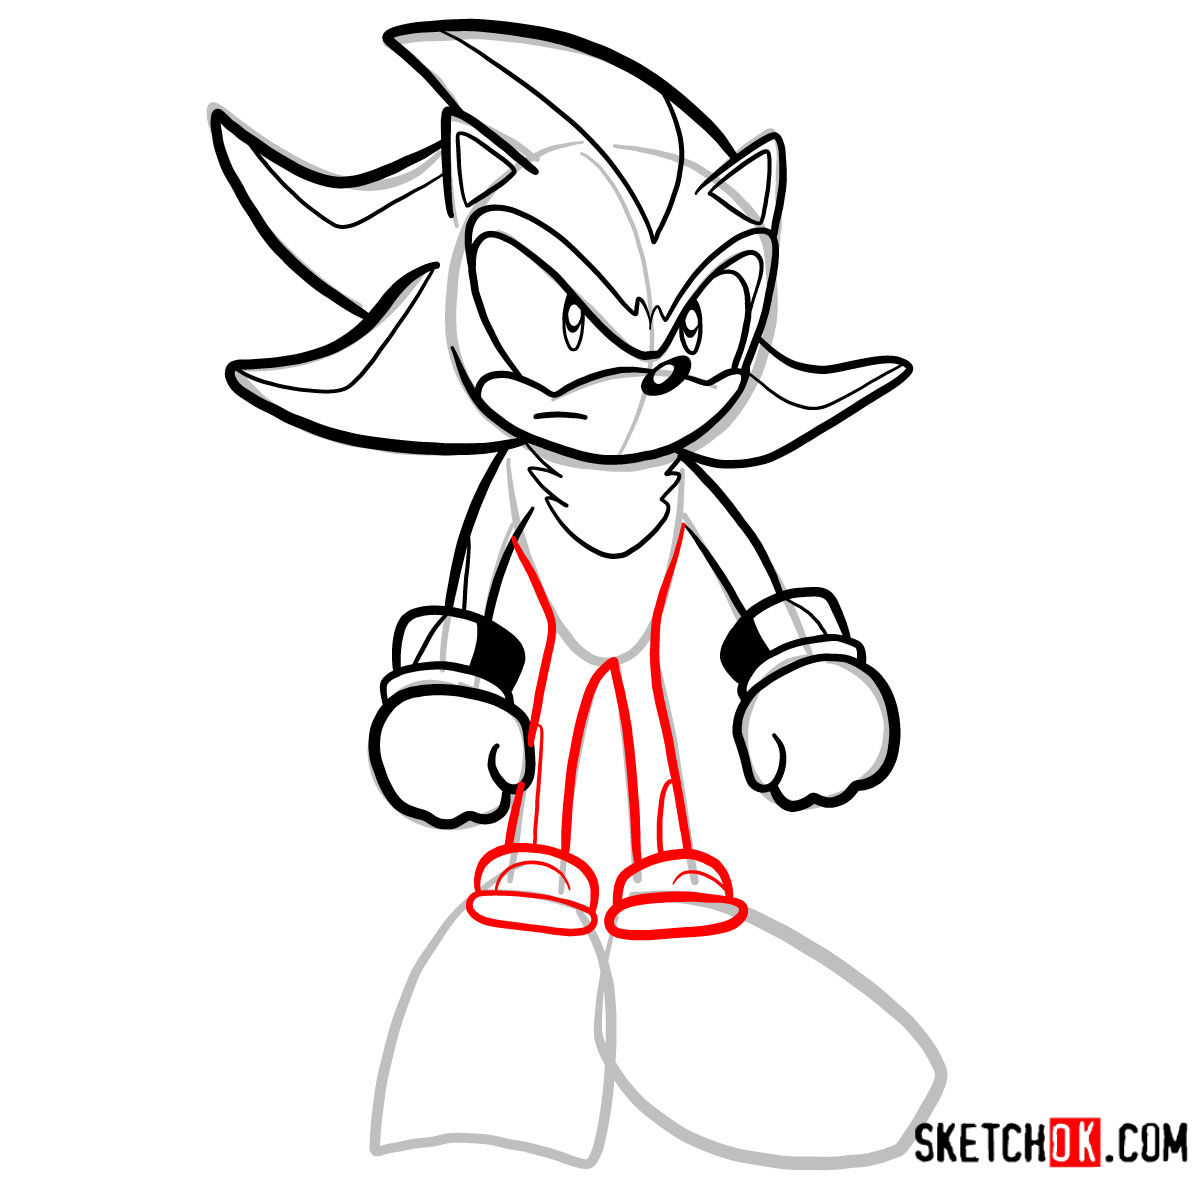 How to draw Shadow the Hedgehog - step 09